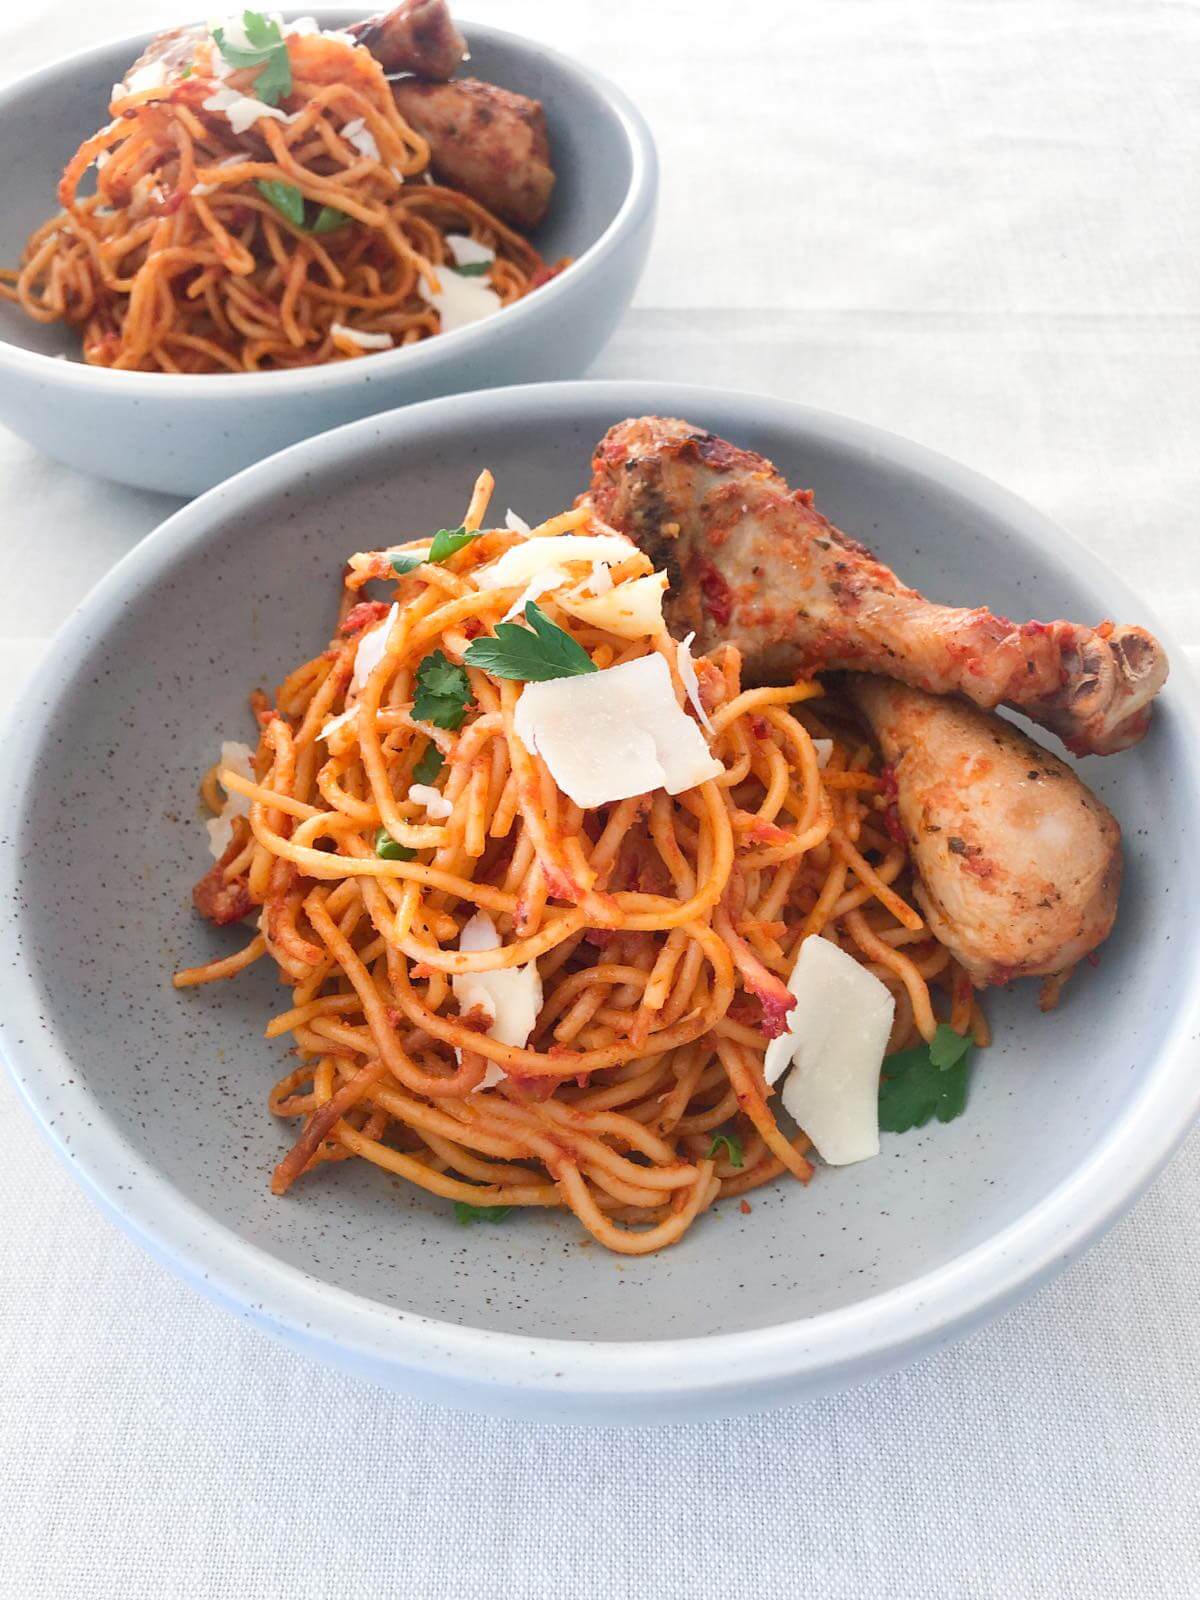 spaghetti with tomato sauce and chicken drumsticks in a blue bowl.